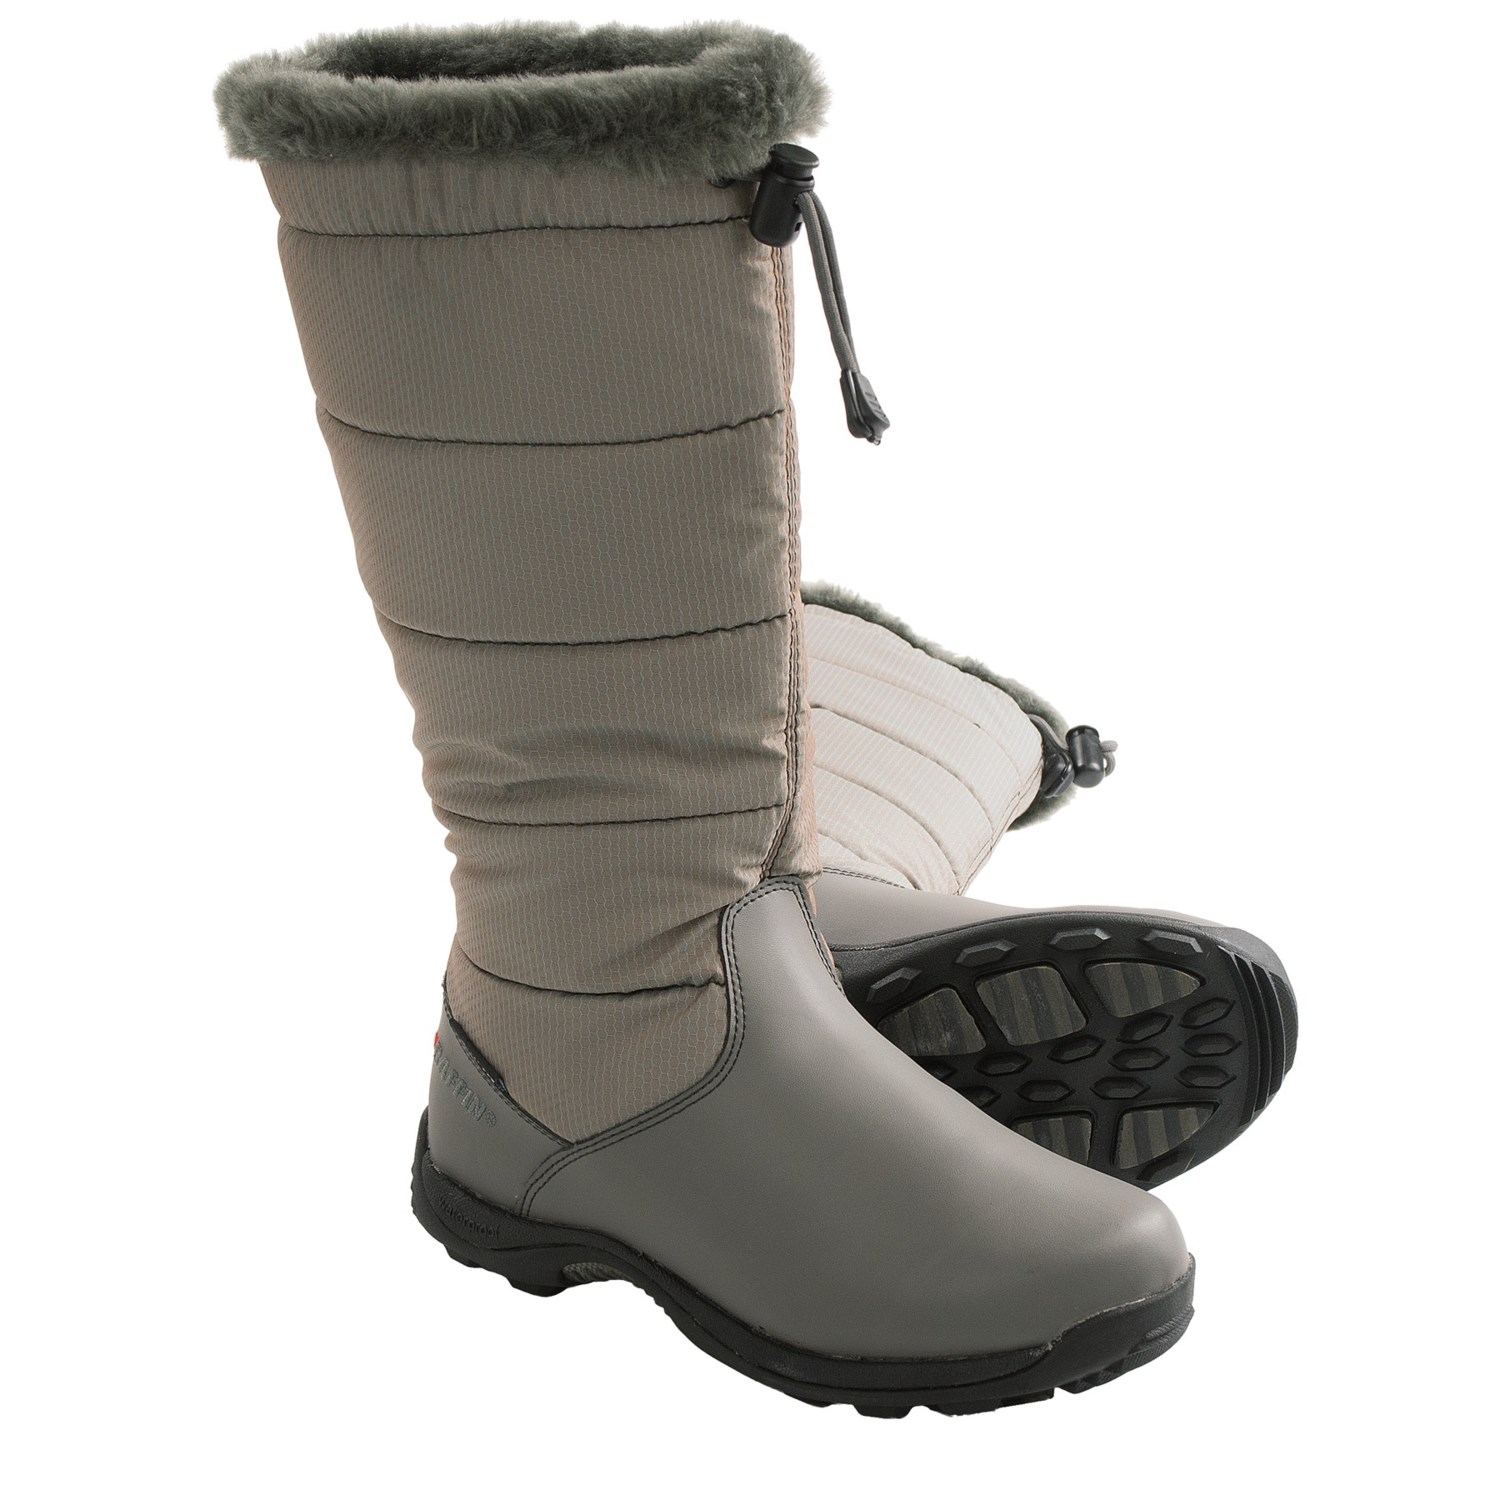 Baffin Boston Snow Boots (For Women) - Save 73%